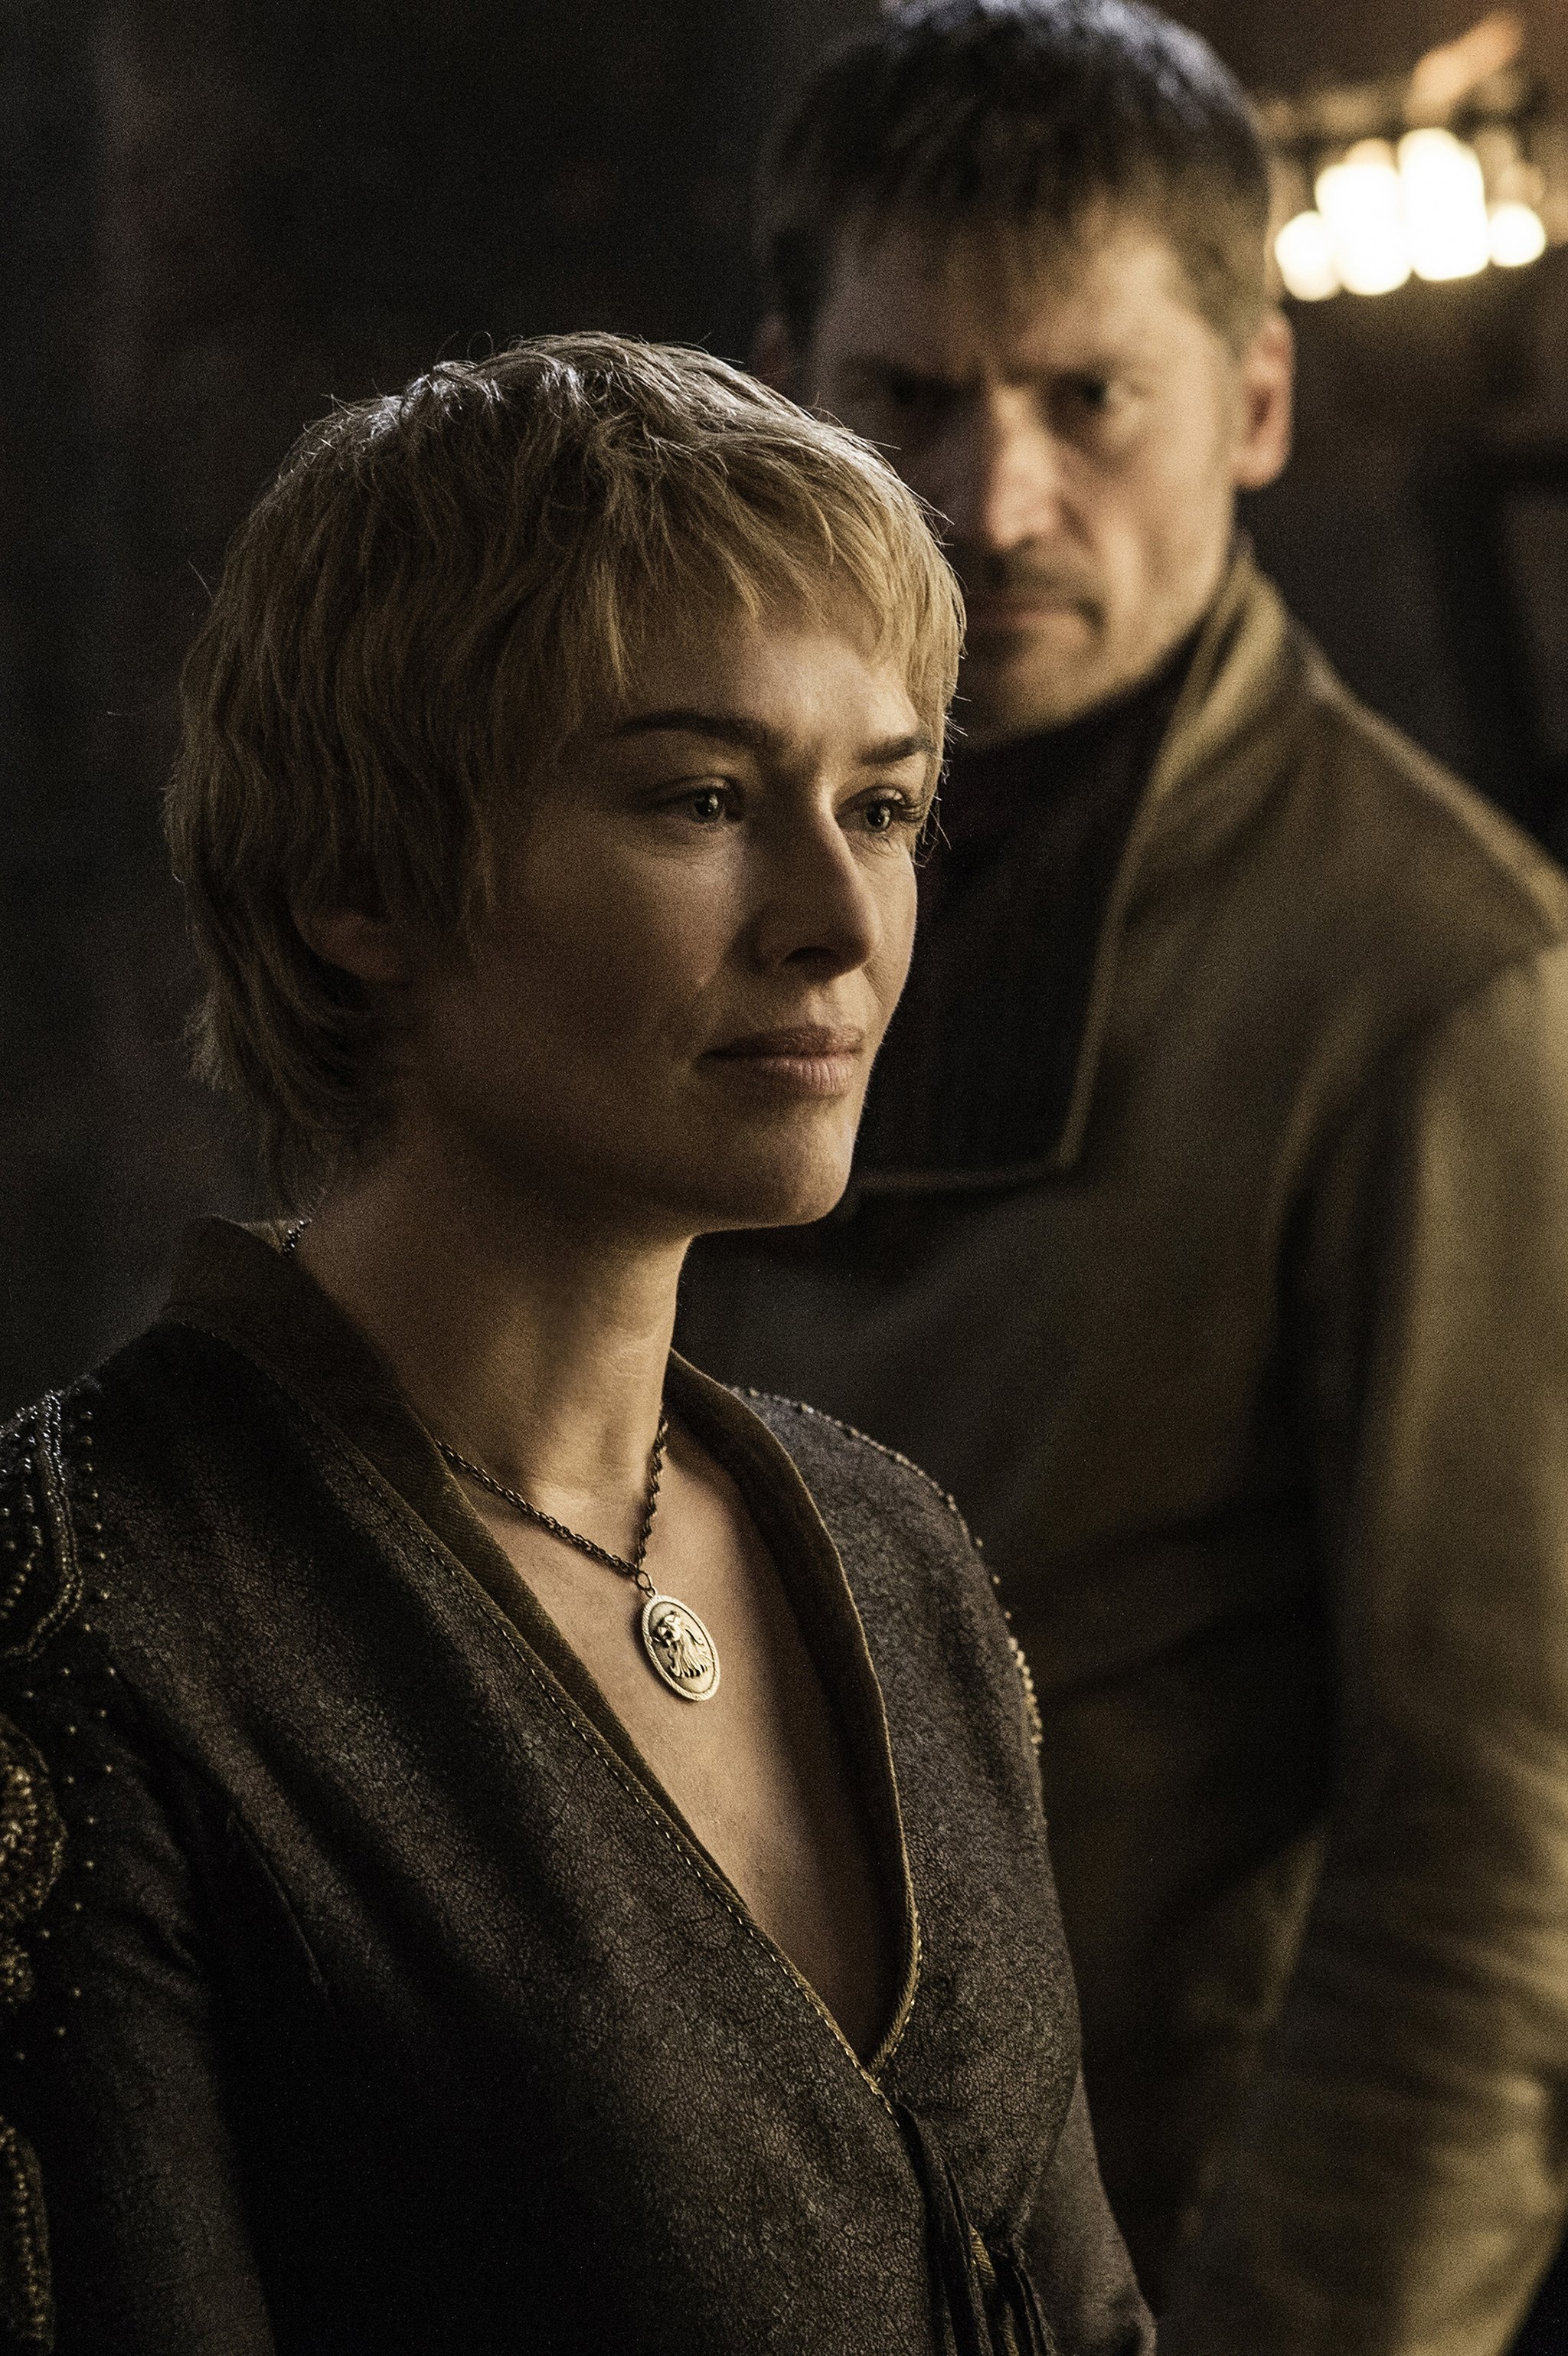 Who Will Kill Cersei Lannister On Game Of Thrones?